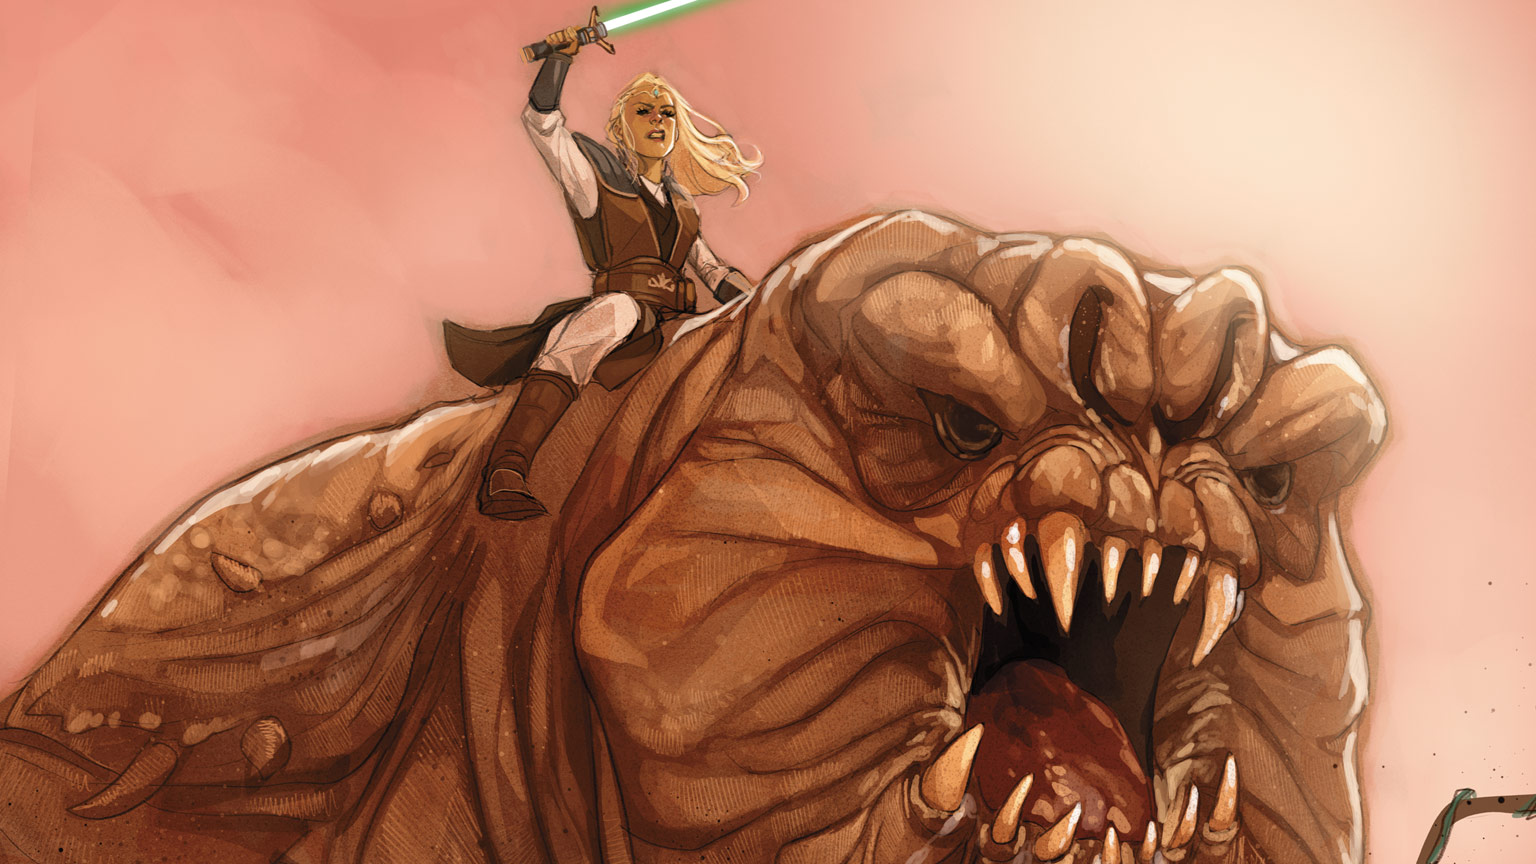 A Jedi Rides a Rancor on the Cover of Marvel’s Star Wars: The High Republic #6, and It’s Amazing – Exclusive Reveal